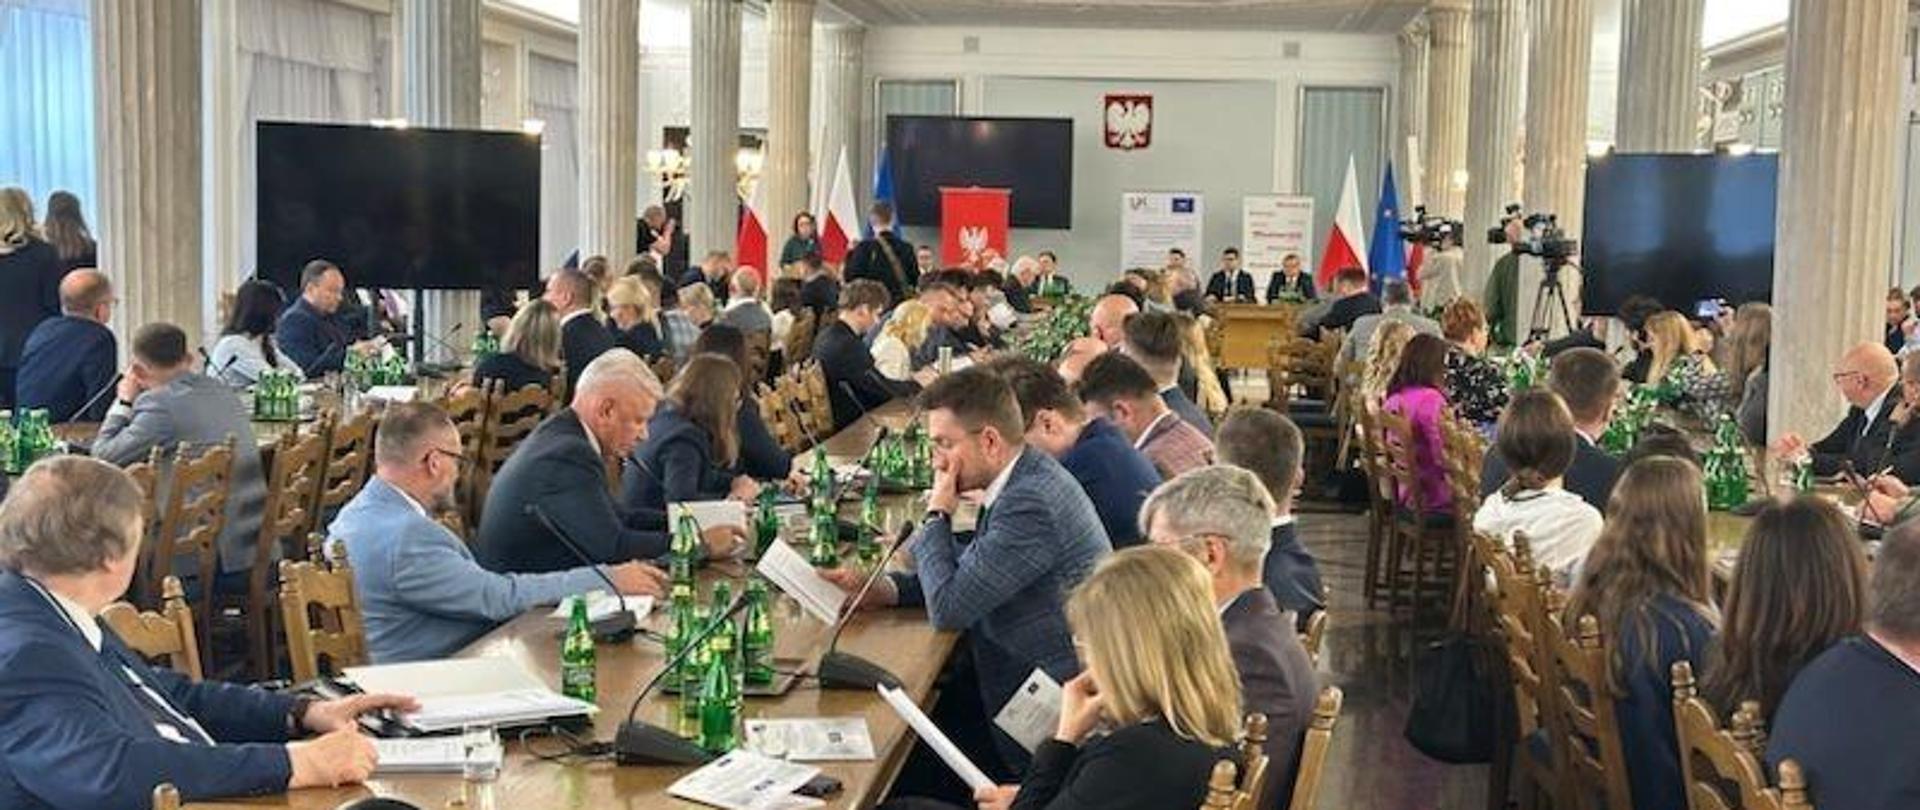 Conference in the Sejm dedicated to the 75th anniversary of the Council of Europe.